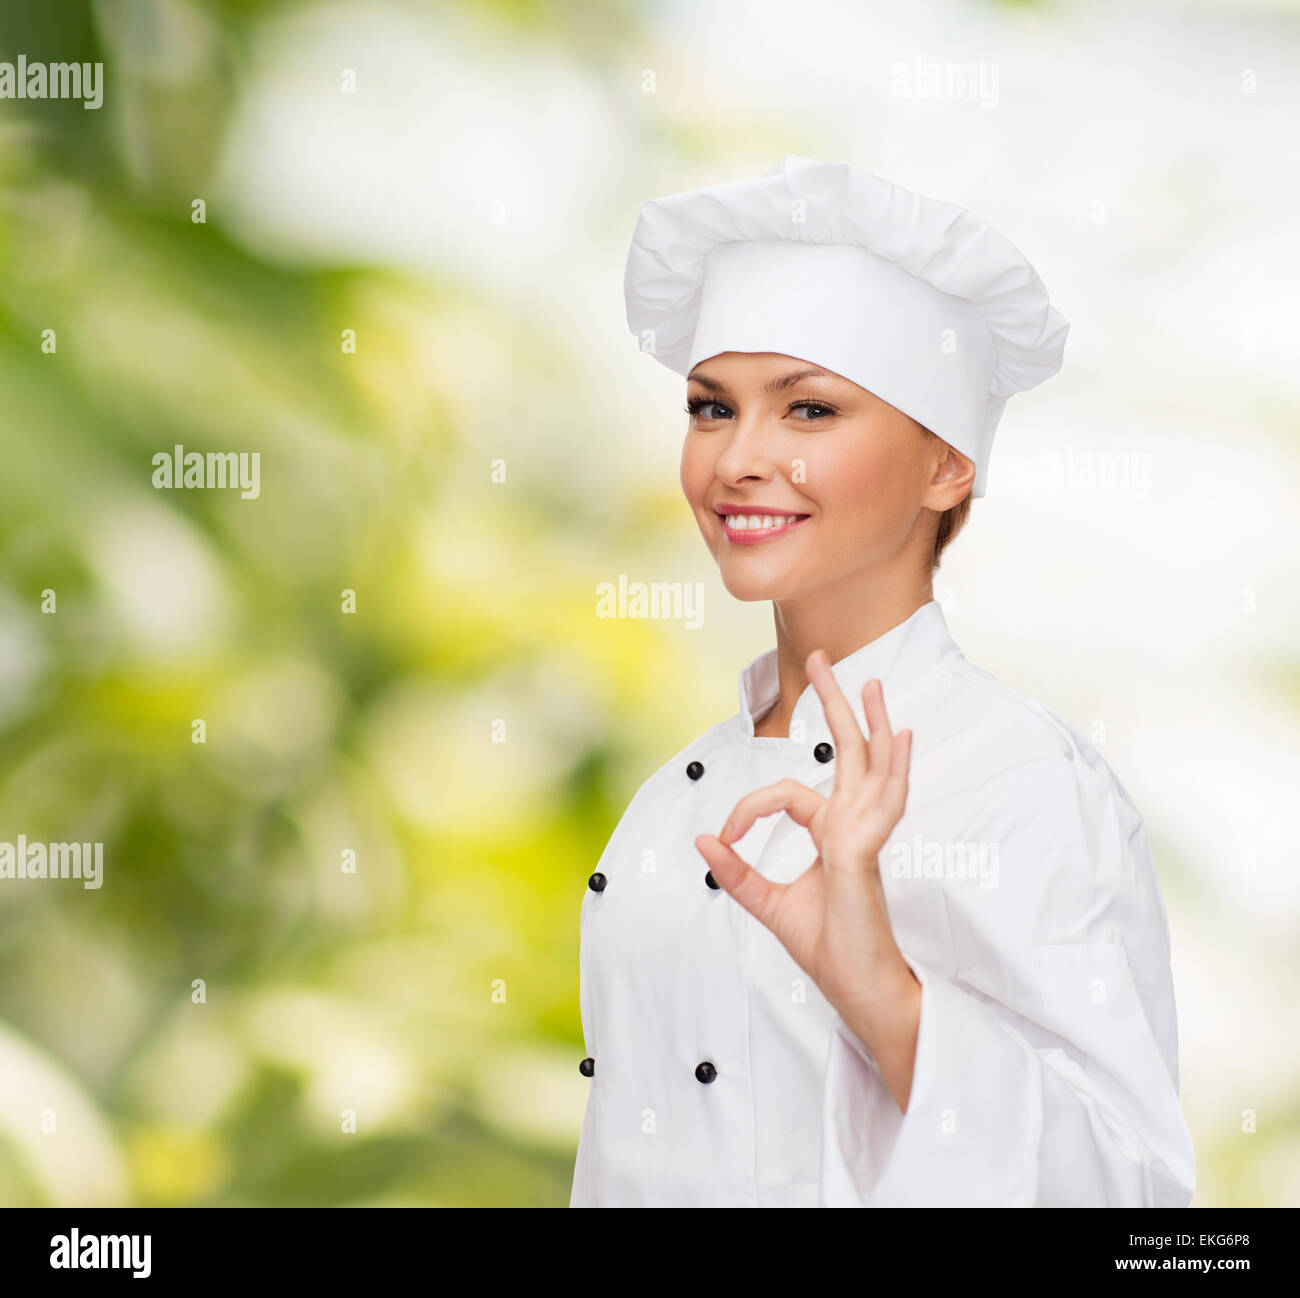 smiling female chef showing ok hand sign Stock Photo - Alamy